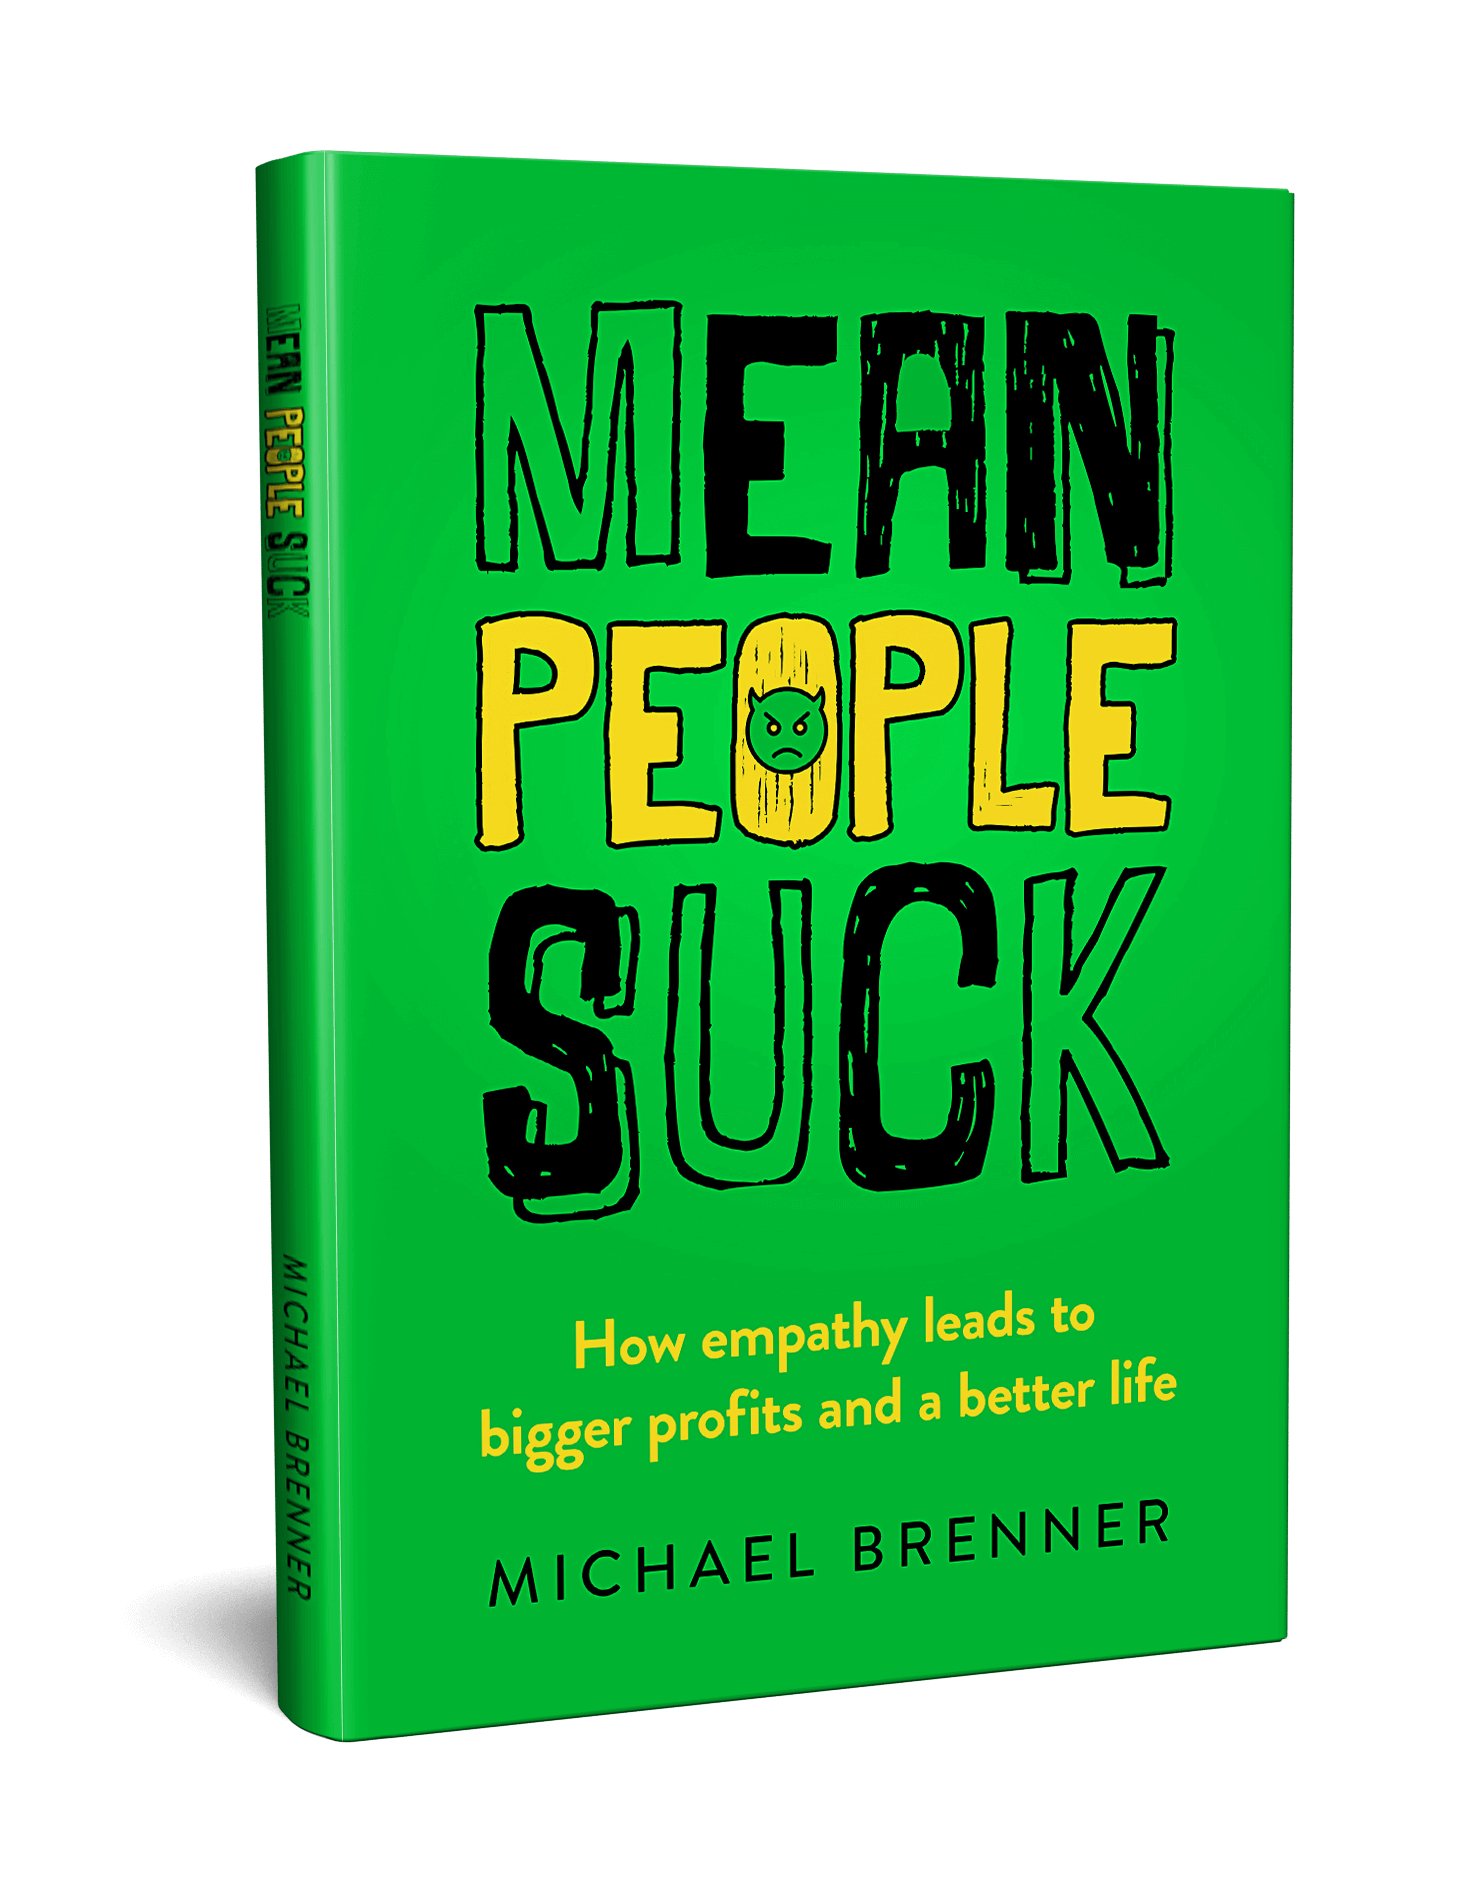 Book Cover: "Mean People Suck" by Michael Brenner